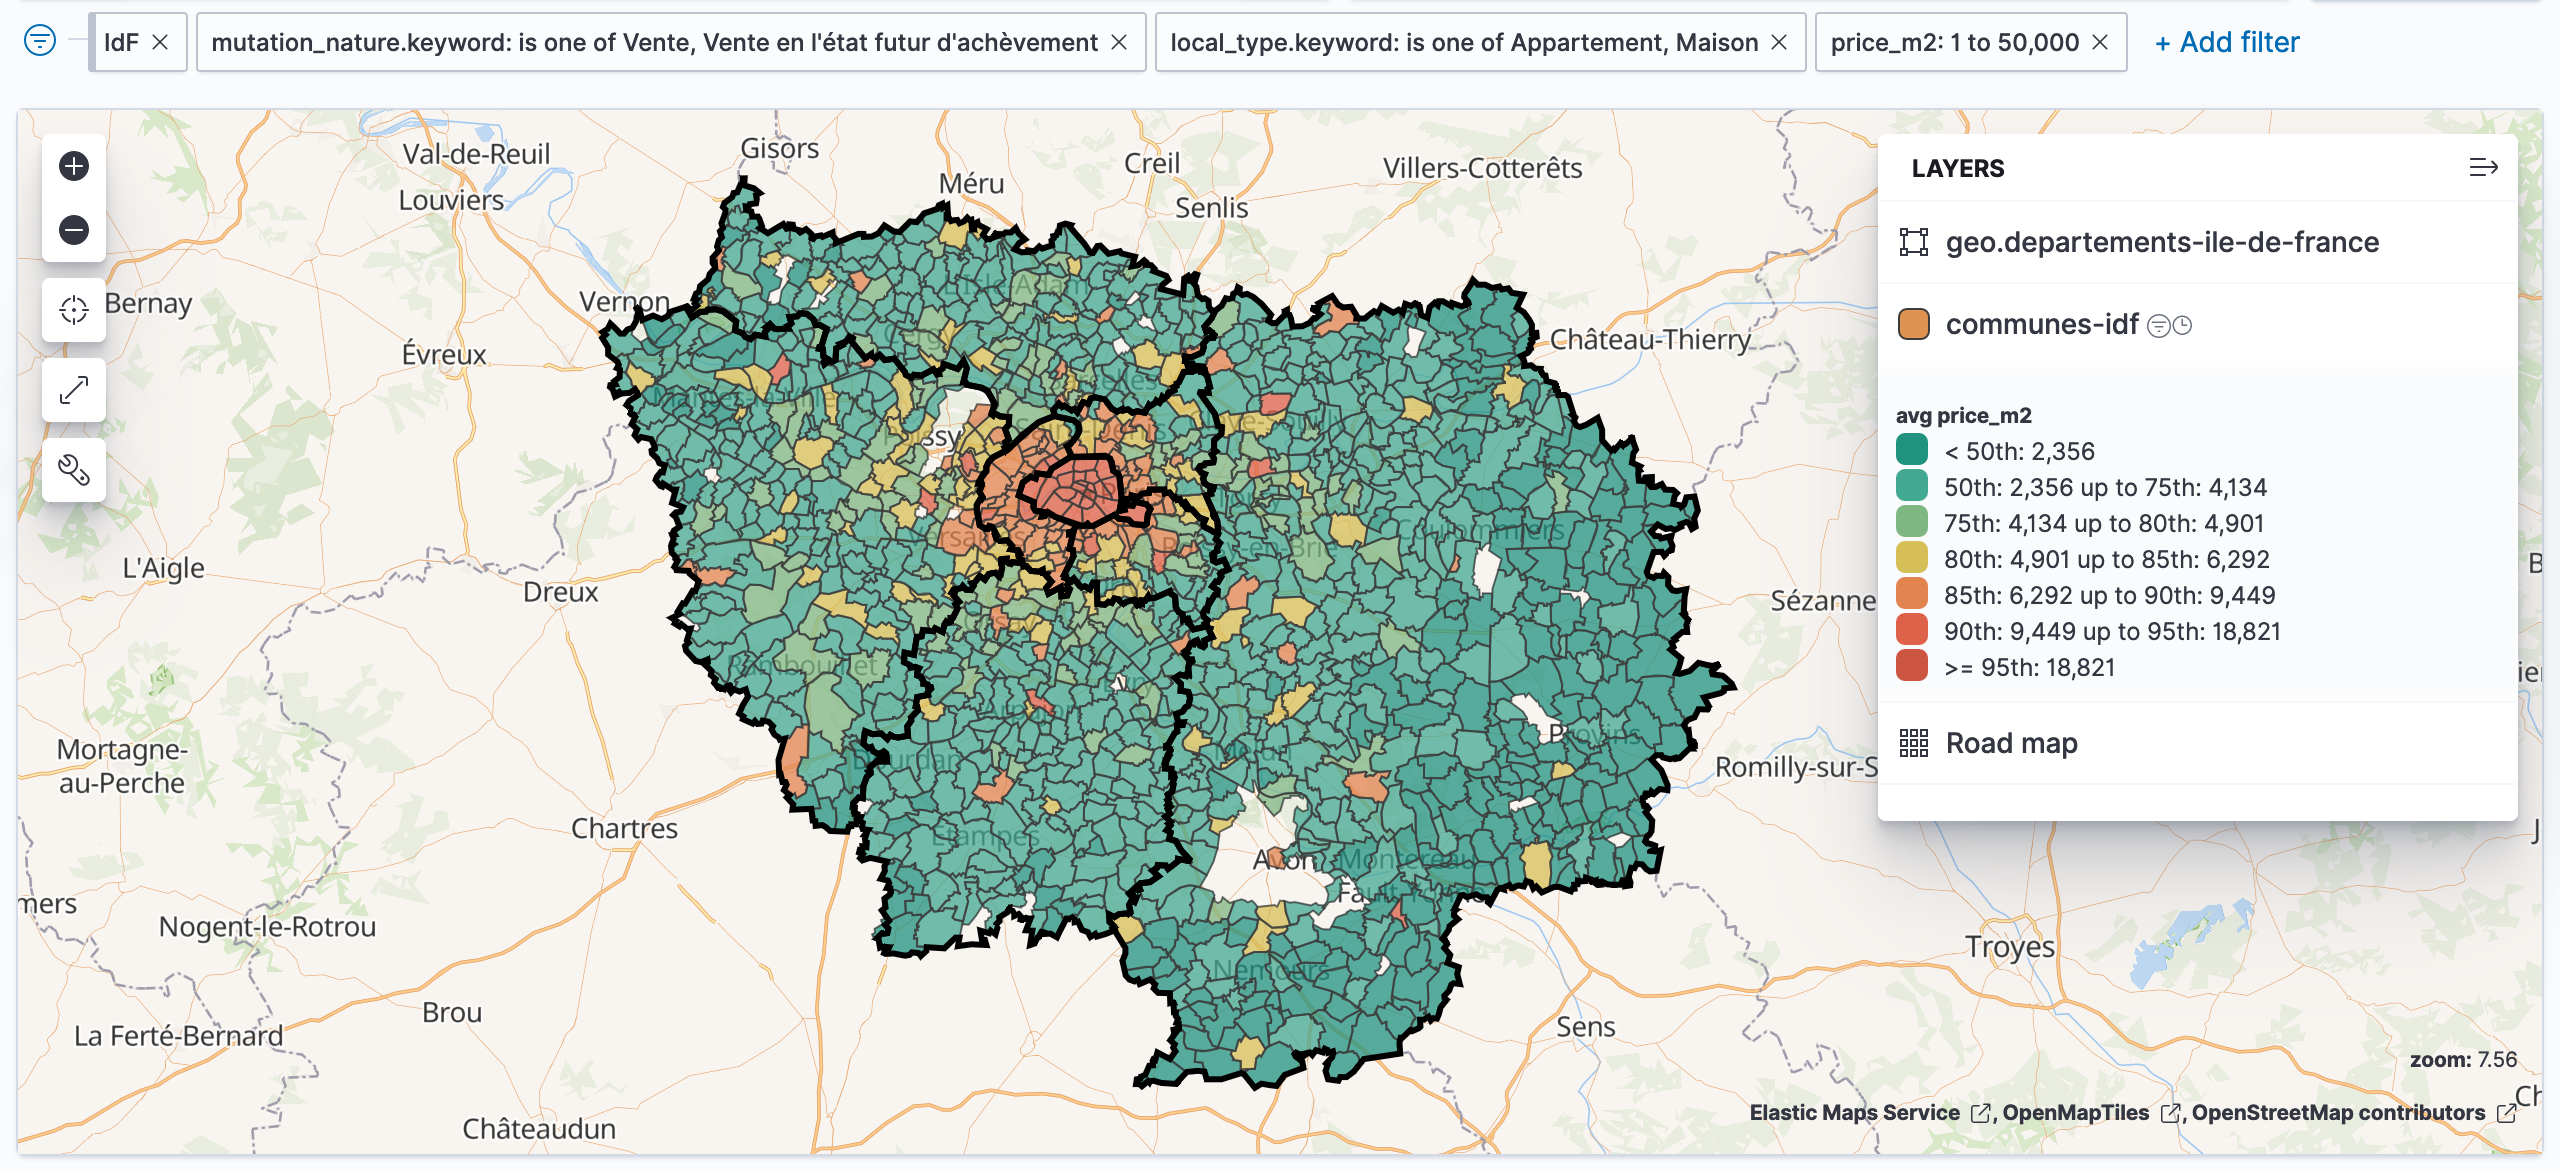 Map: sales of apartments and houses in Ile-de-France in 2020